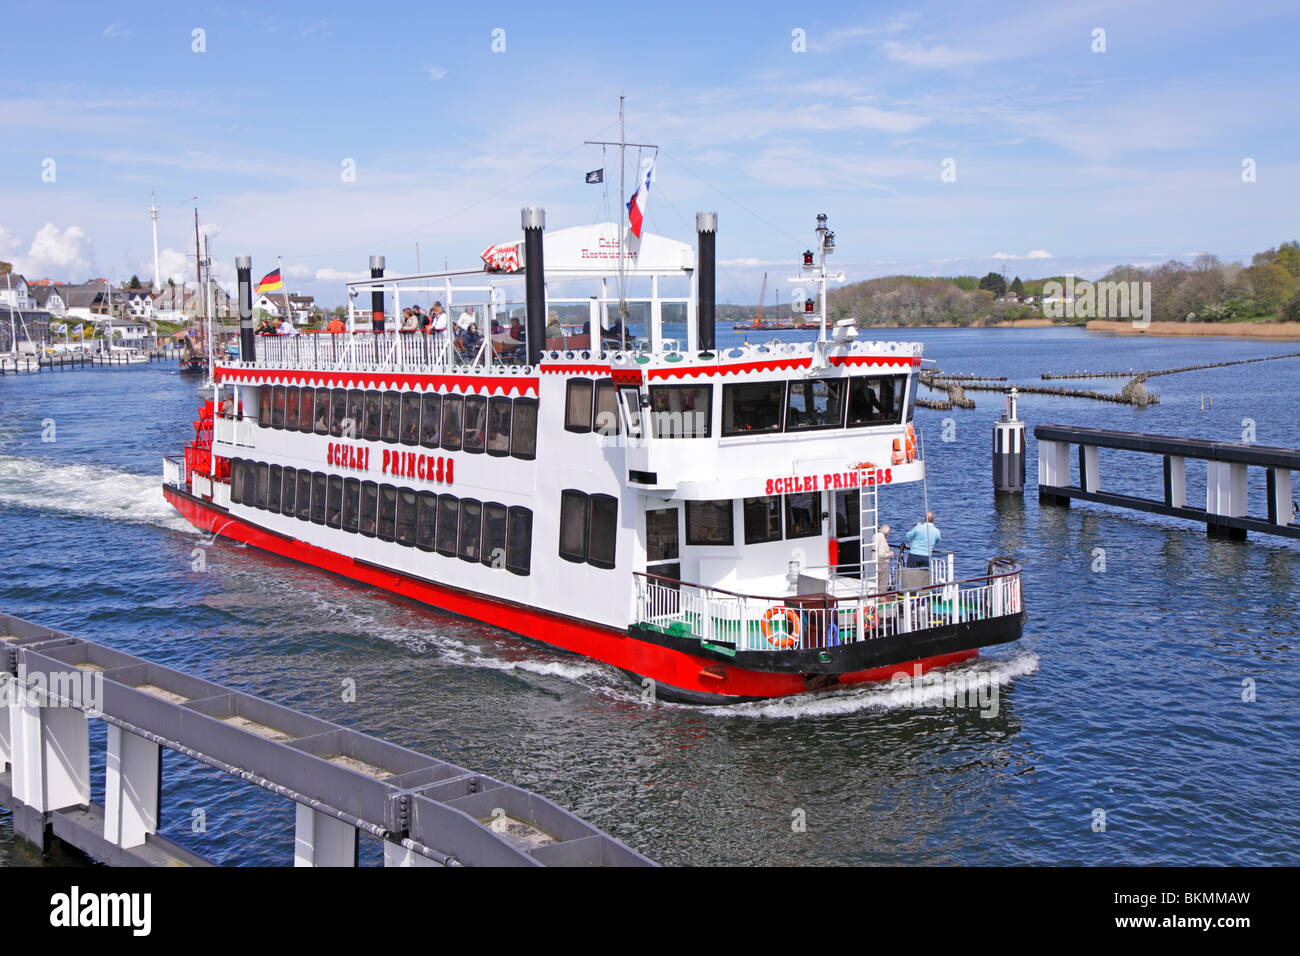 paddle-steamer Schlei Princess at Kappeln, Baltic Sea Fjord Schlei, Schleswig-Holstein, Northern Germany Stock Photo